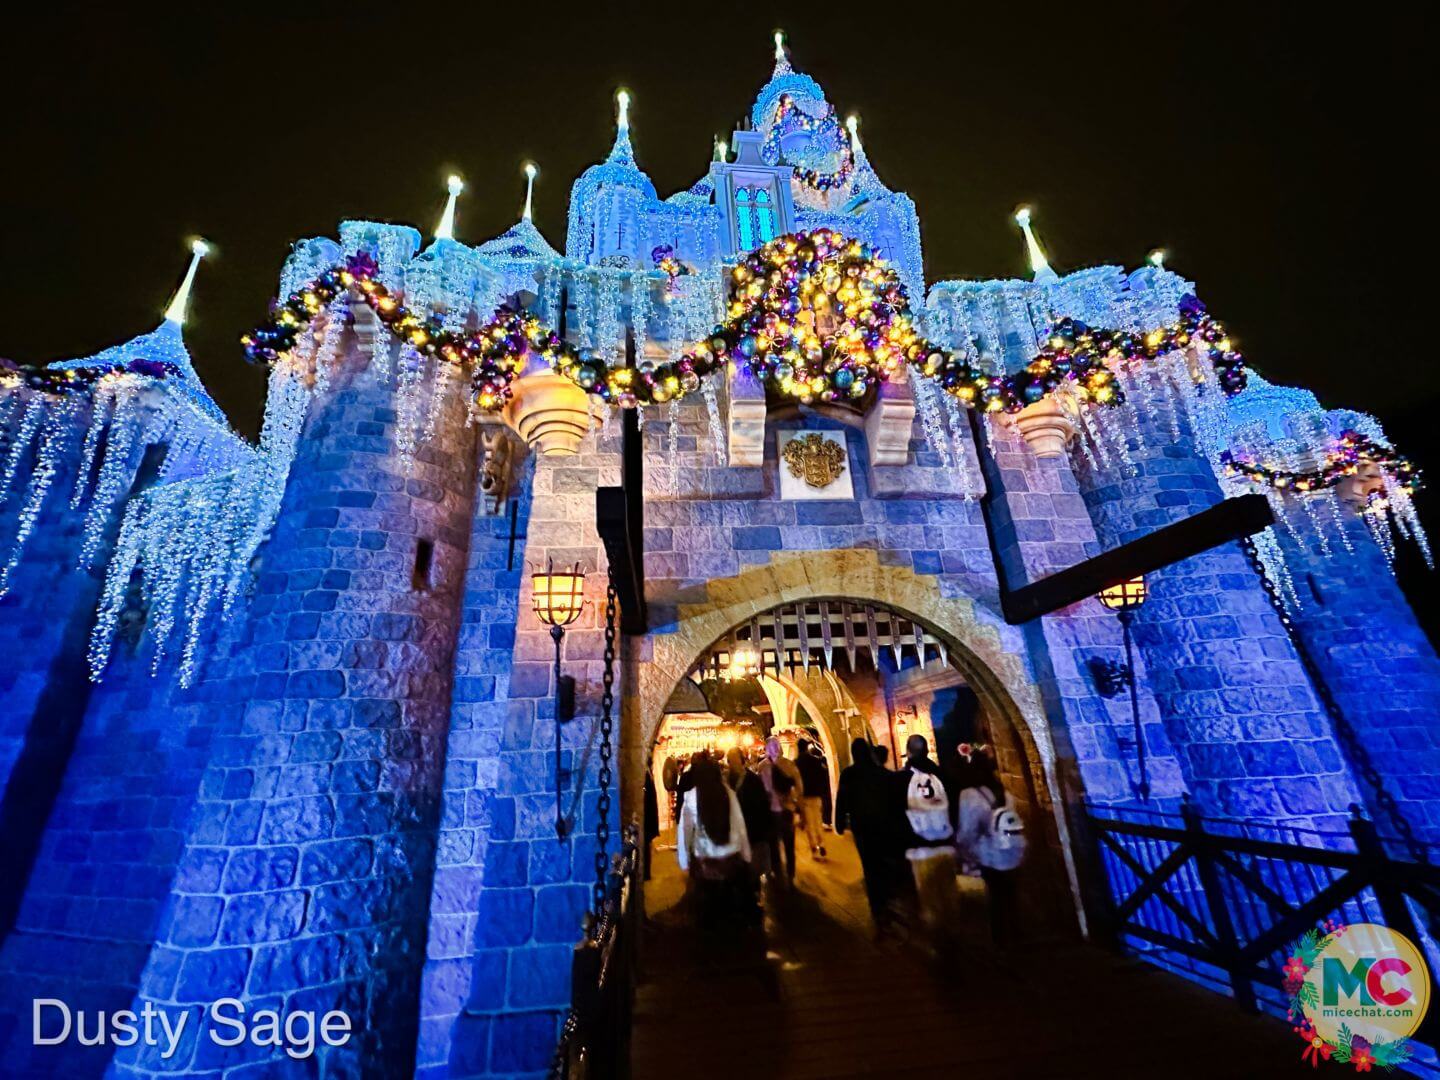 A castle with lights and garland on it - Disneyland